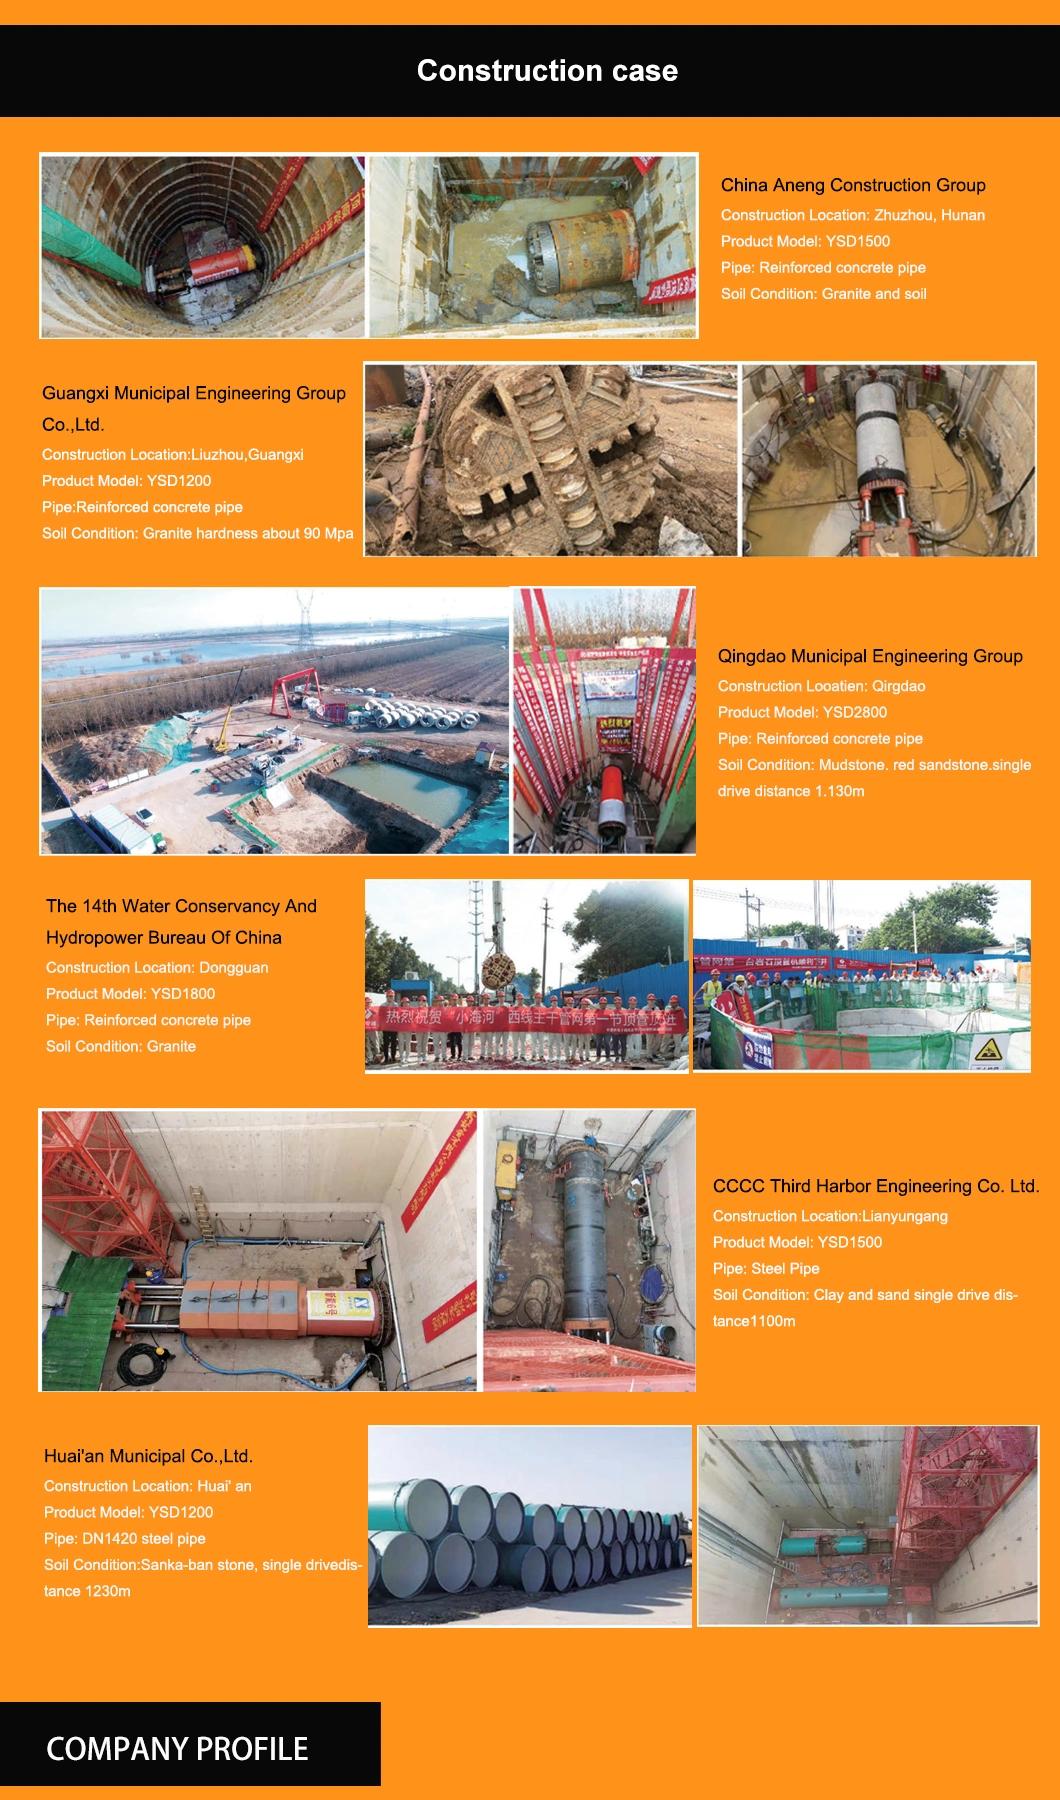 Top Trenchless Project Ysd3000 Rock Pipe Jacking Machine for Rcc with Complete Specifications